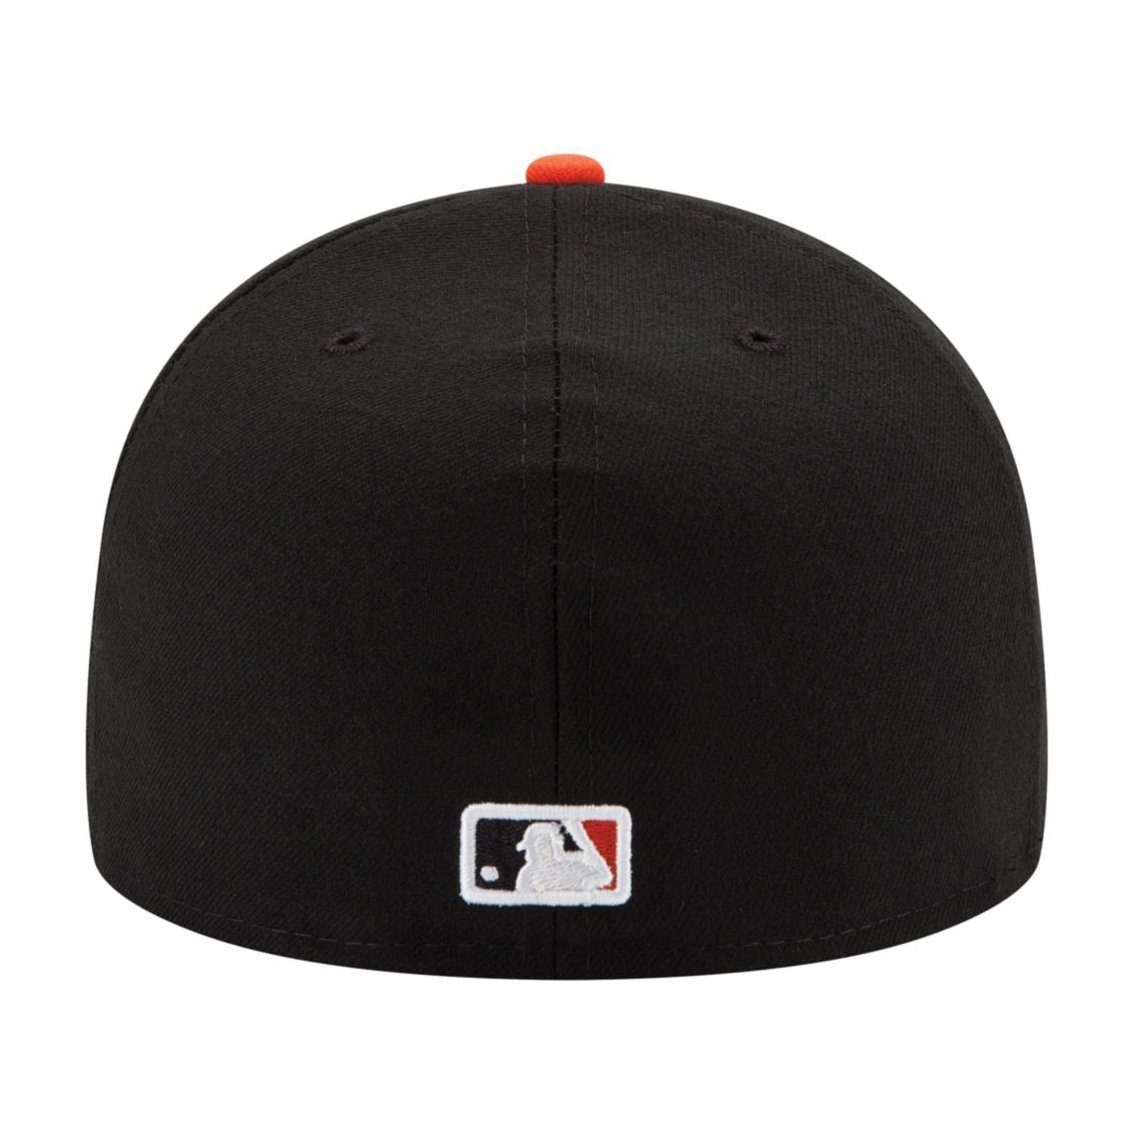 New Era Fitted Cap Baltimore AUTHENTIC ONFIELD Orioles 59Fifty